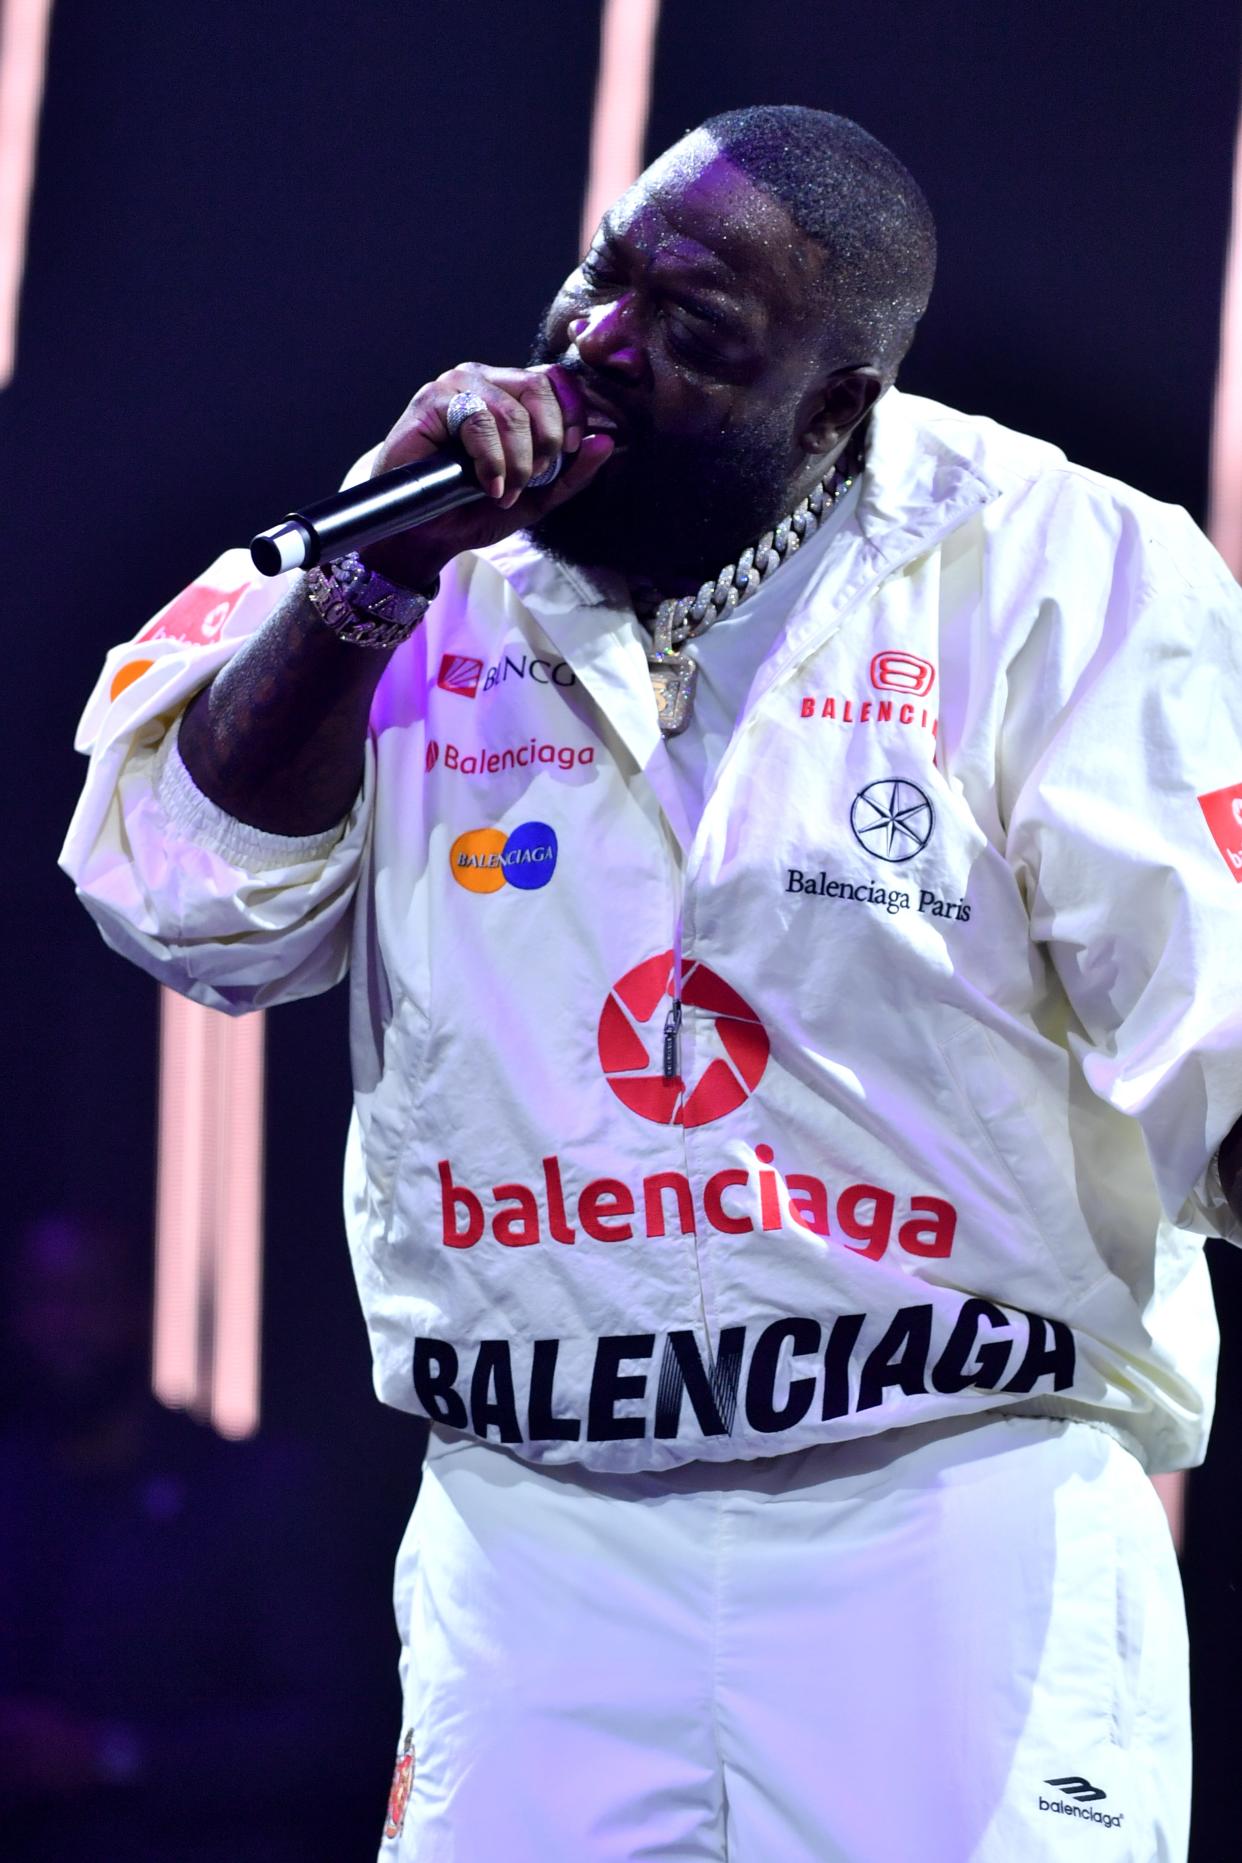 Rick Ross appears to be unfazed by an alleged attack on him and his team in Vancouver, Canada, on Sunday, telling TMZ he "can't wait to go back."